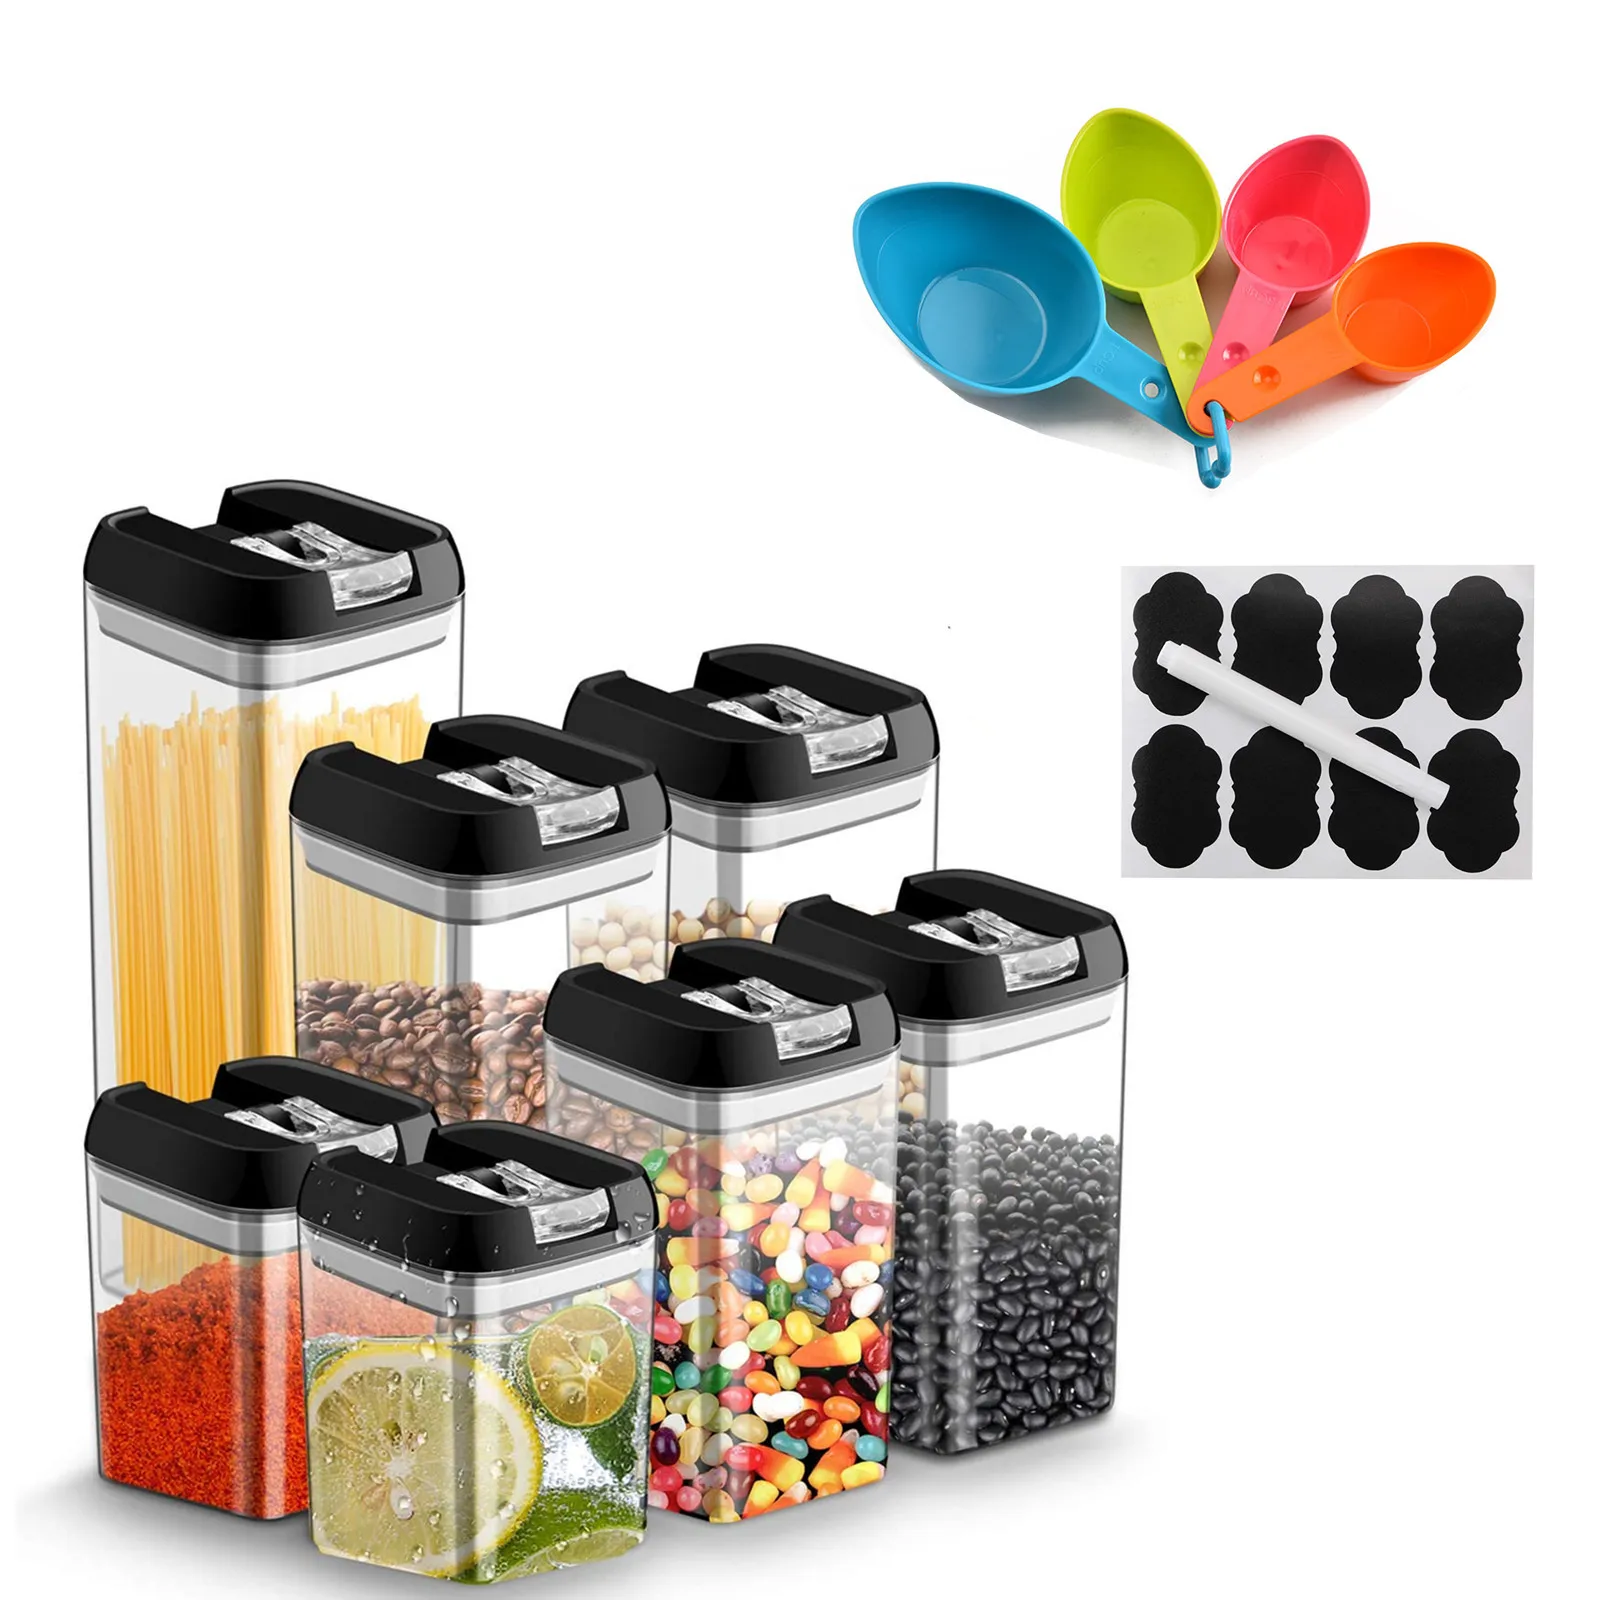 

7Pcs Plastic Food Storage Container Jar Set with Lid Kitchen Bulk Sealed Cans Refrigerator Multigrain Tank Container for Cereal